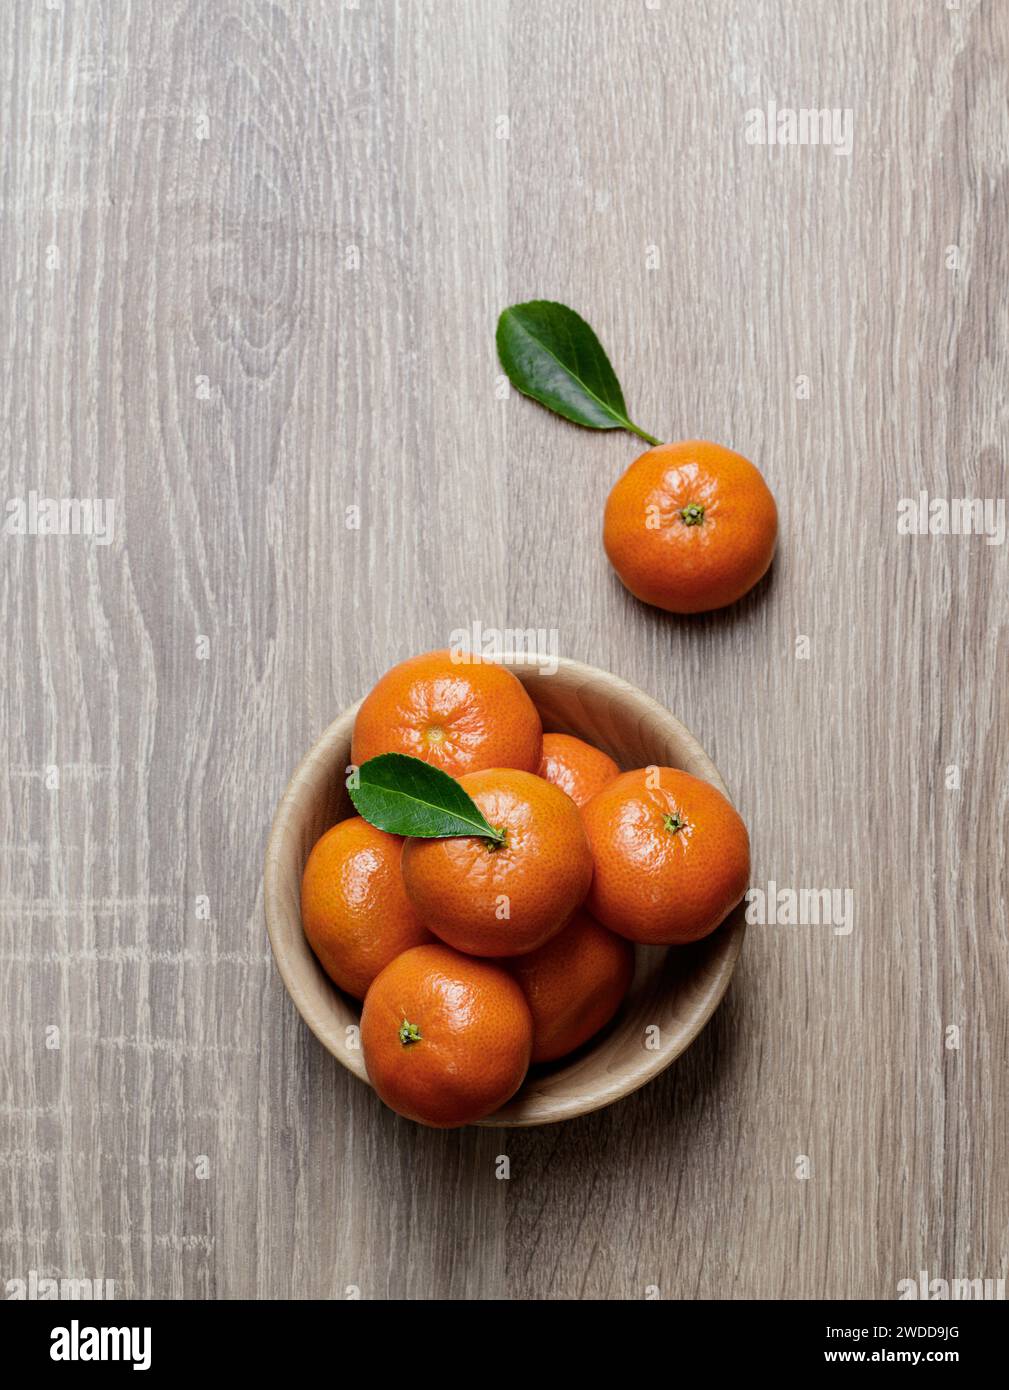 mandarine tangerine group in wooden dish ripe and fresh with leaf on wooden background Stock Photo